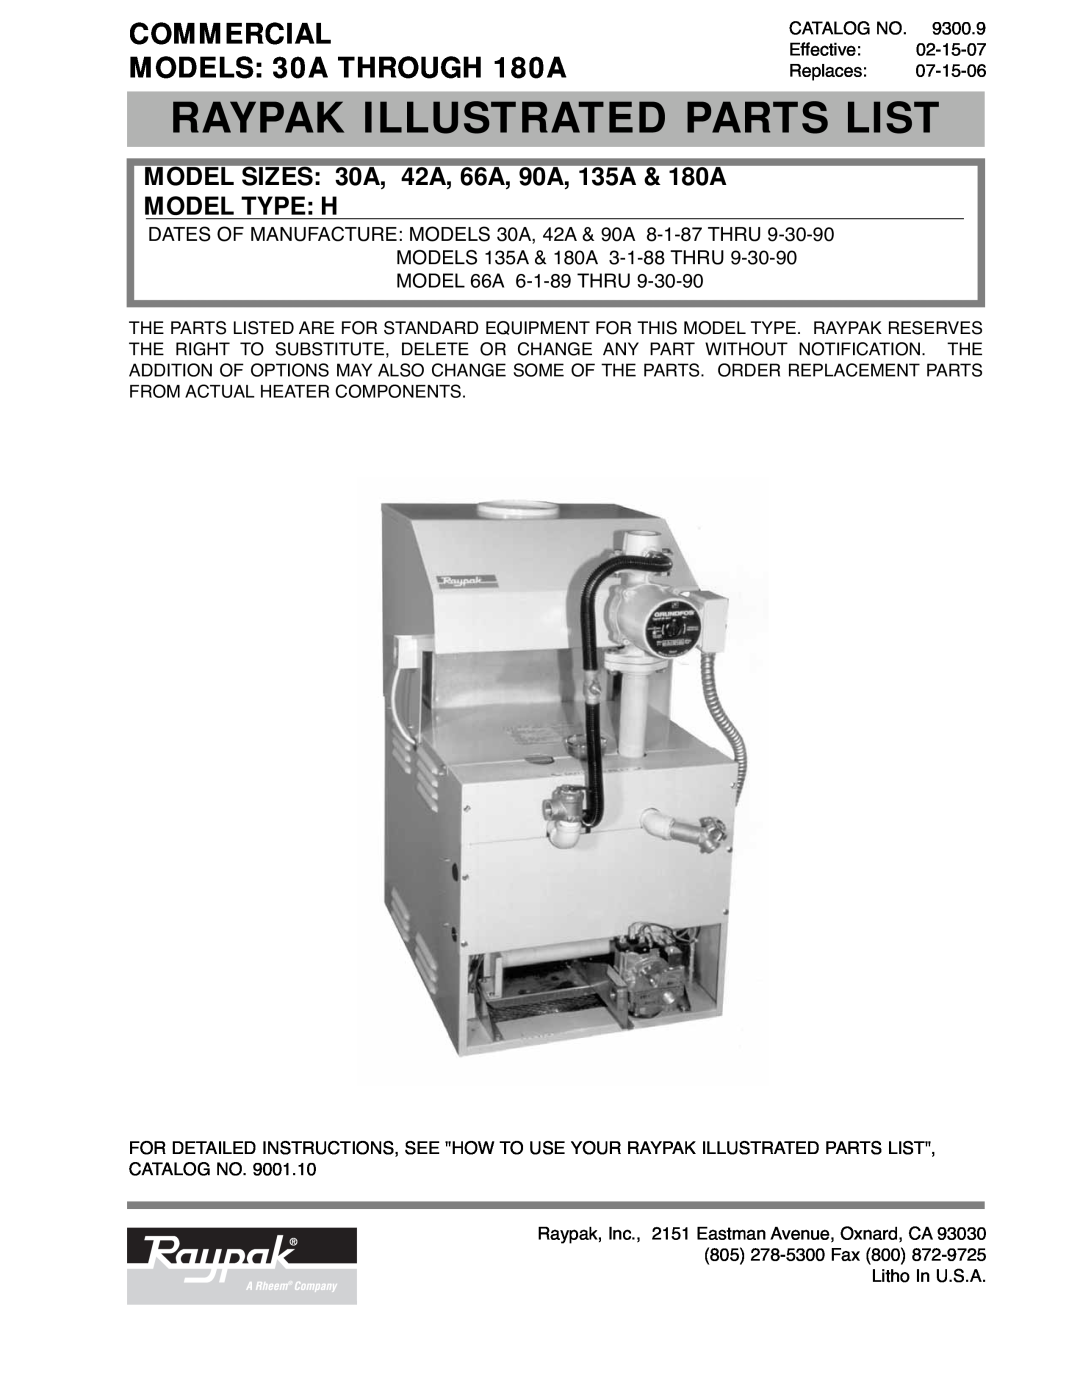 Raypak 90A, 42A, 66A manual Raypak Illustrated Parts List, COMMERCIAL MODELS 30A THROUGH 180A 